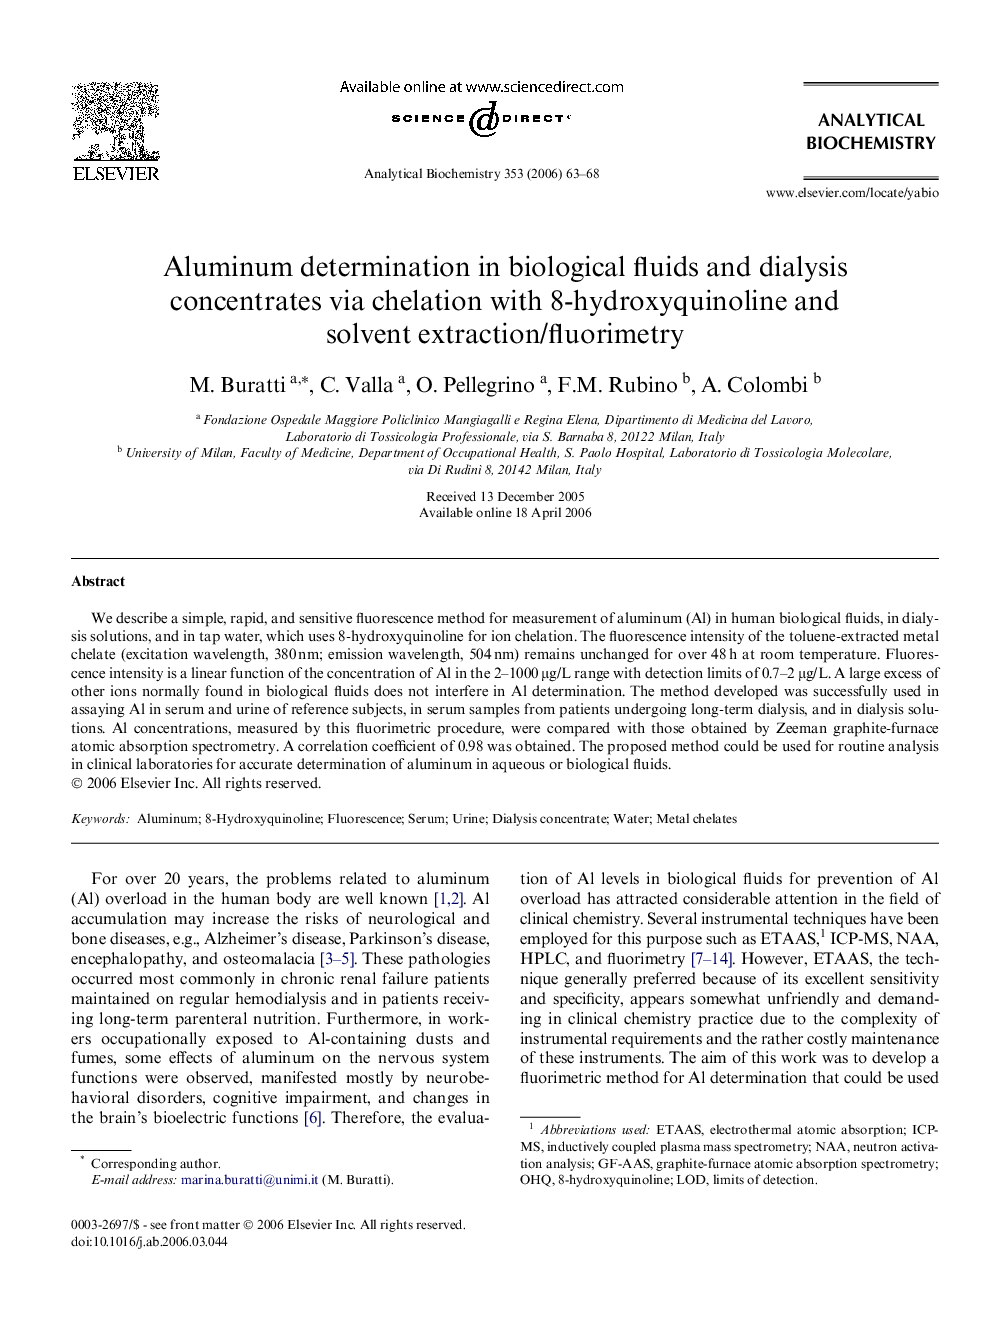 Aluminum determination in biological fluids and dialysis concentrates via chelation with 8-hydroxyquinoline and solvent extraction/fluorimetry